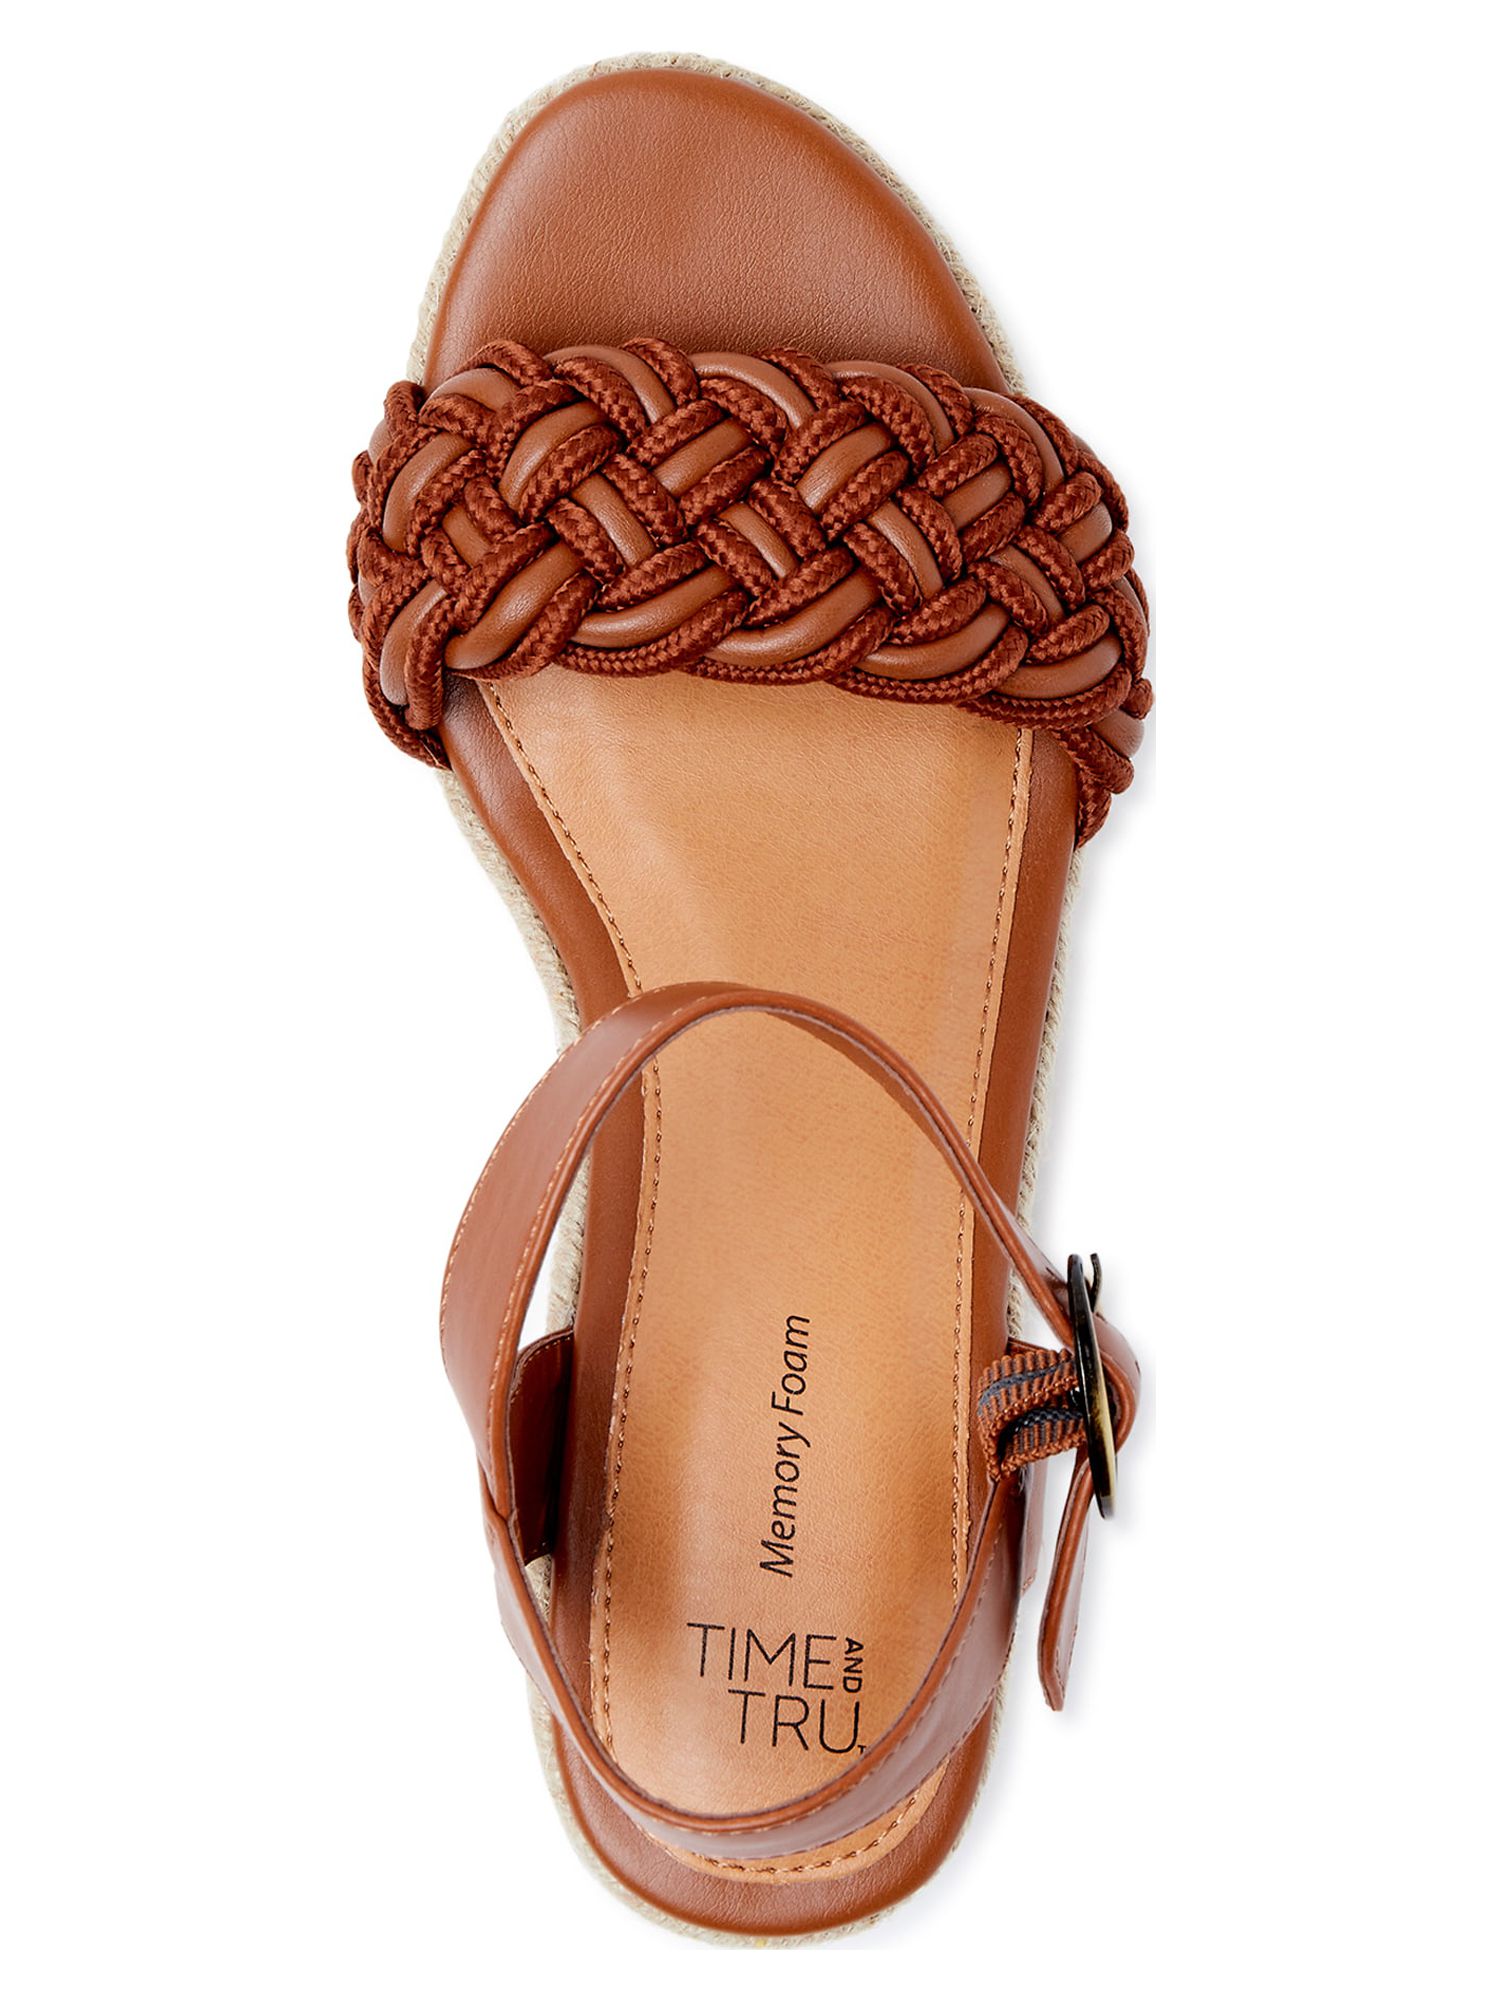 Time and Tru Women's Braided Wedge Sandals, Wide Width Available - image 2 of 5